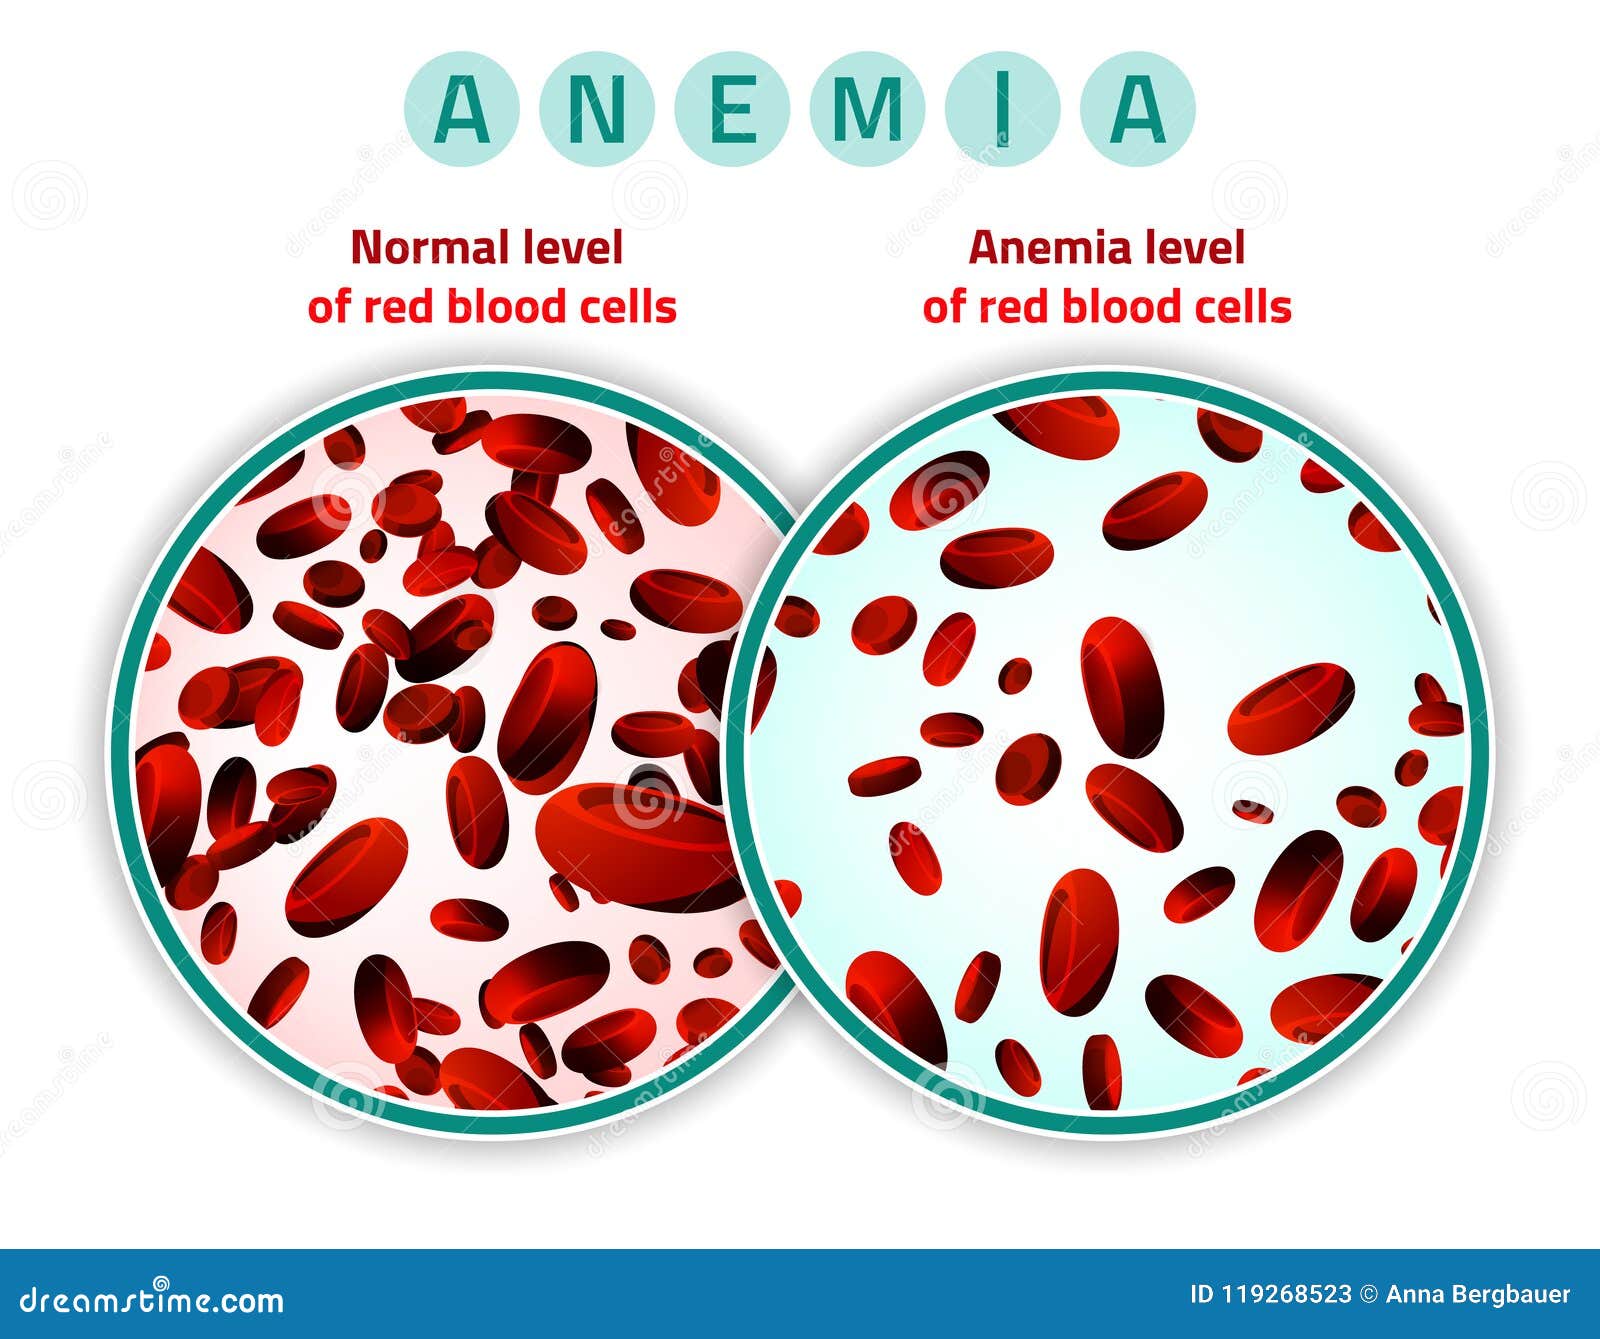 Anemia Cartoons, Illustrations & Vector Stock Images - 2583 Pictures to